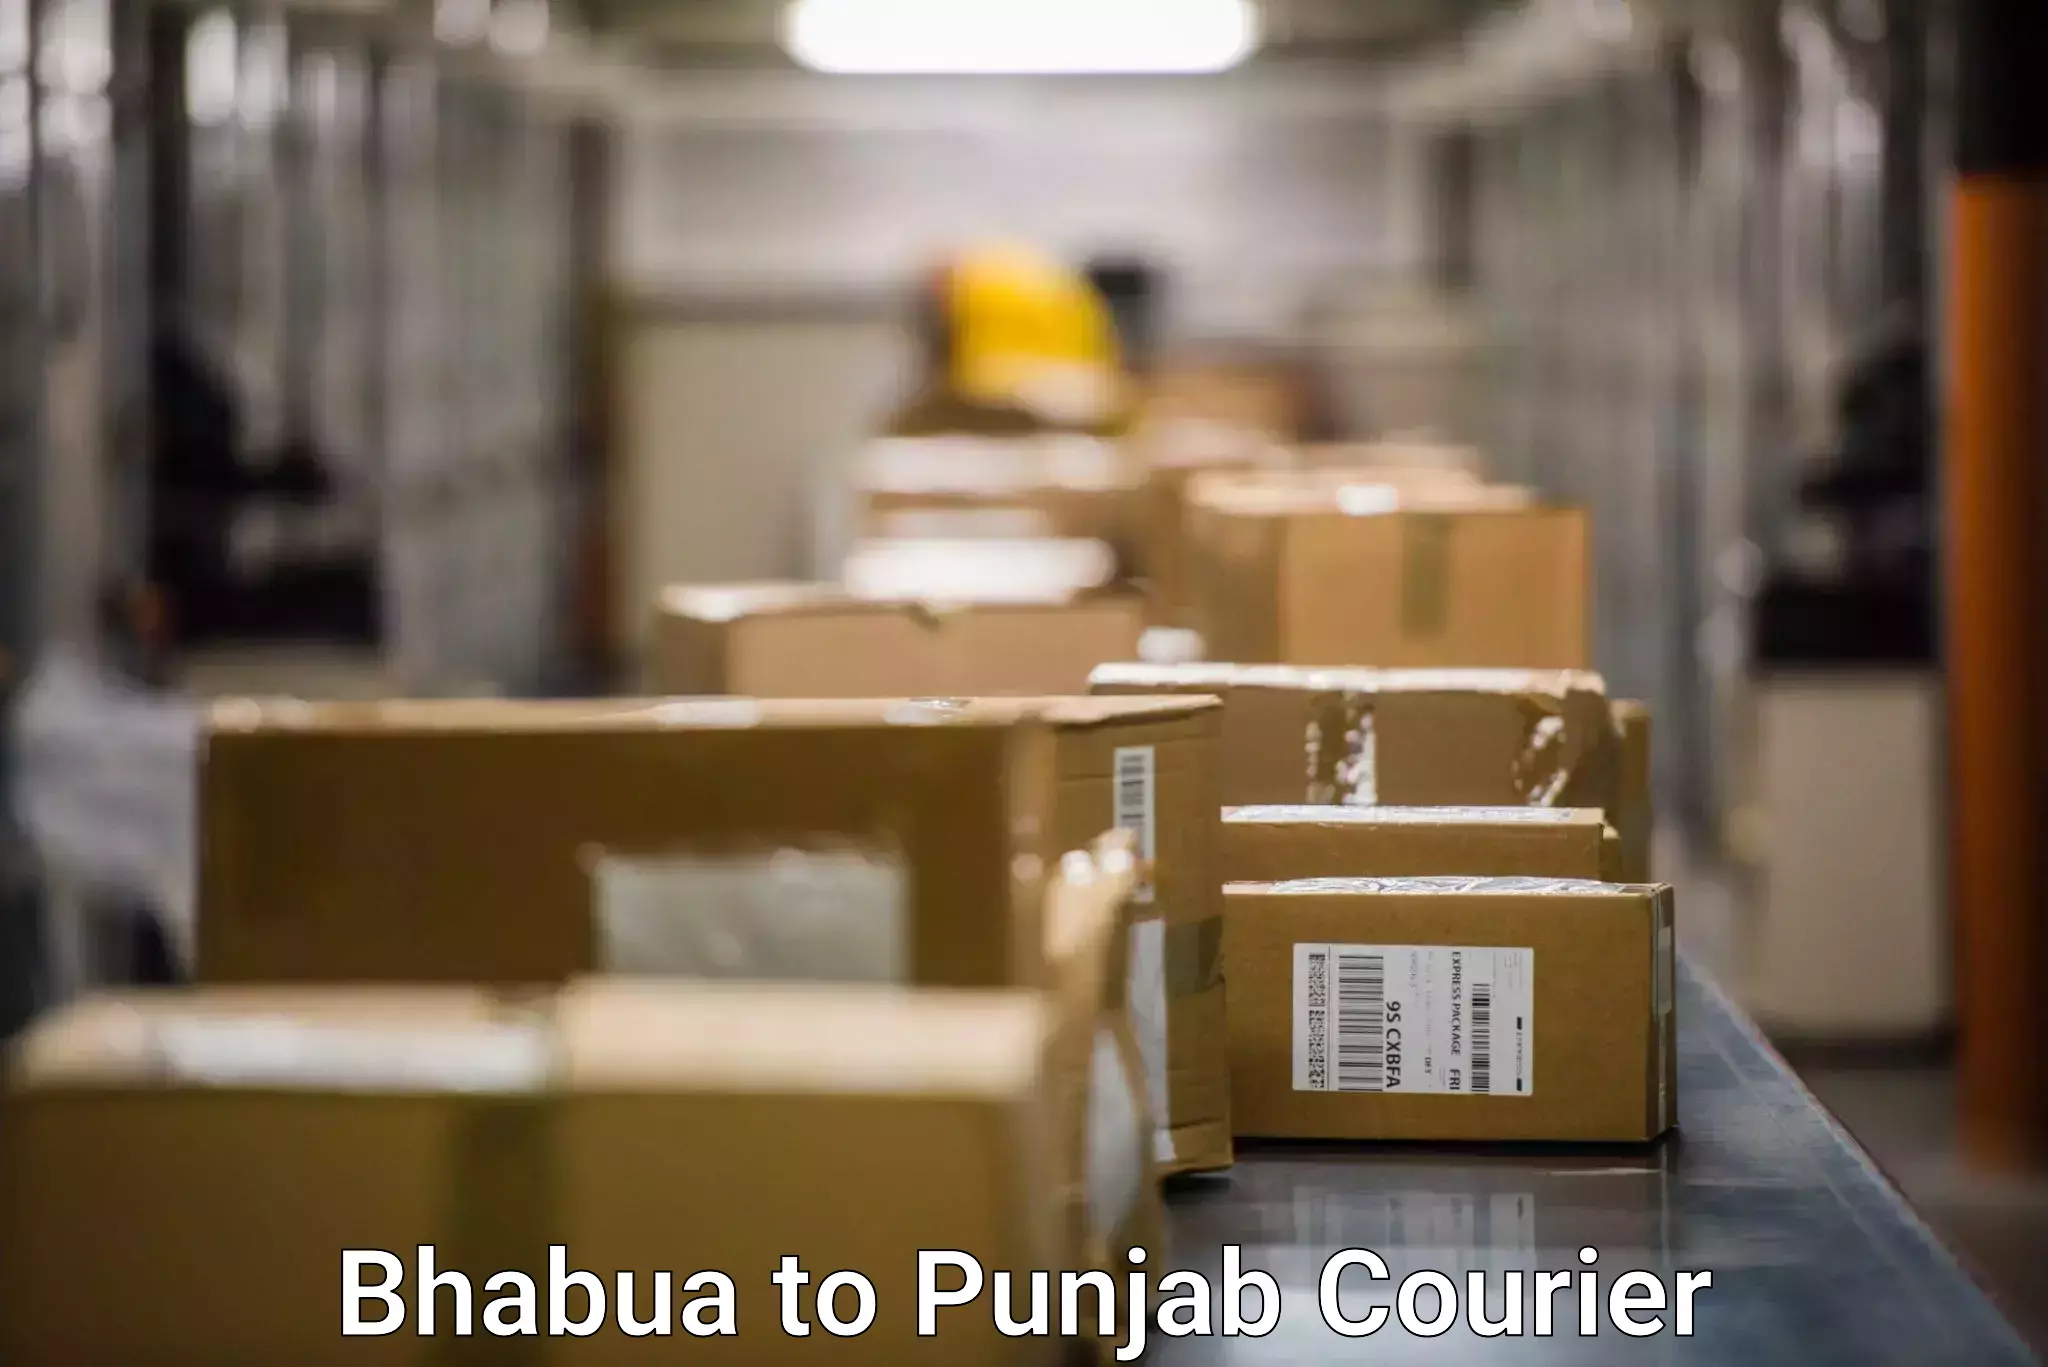 Punctual parcel services Bhabua to Amritsar